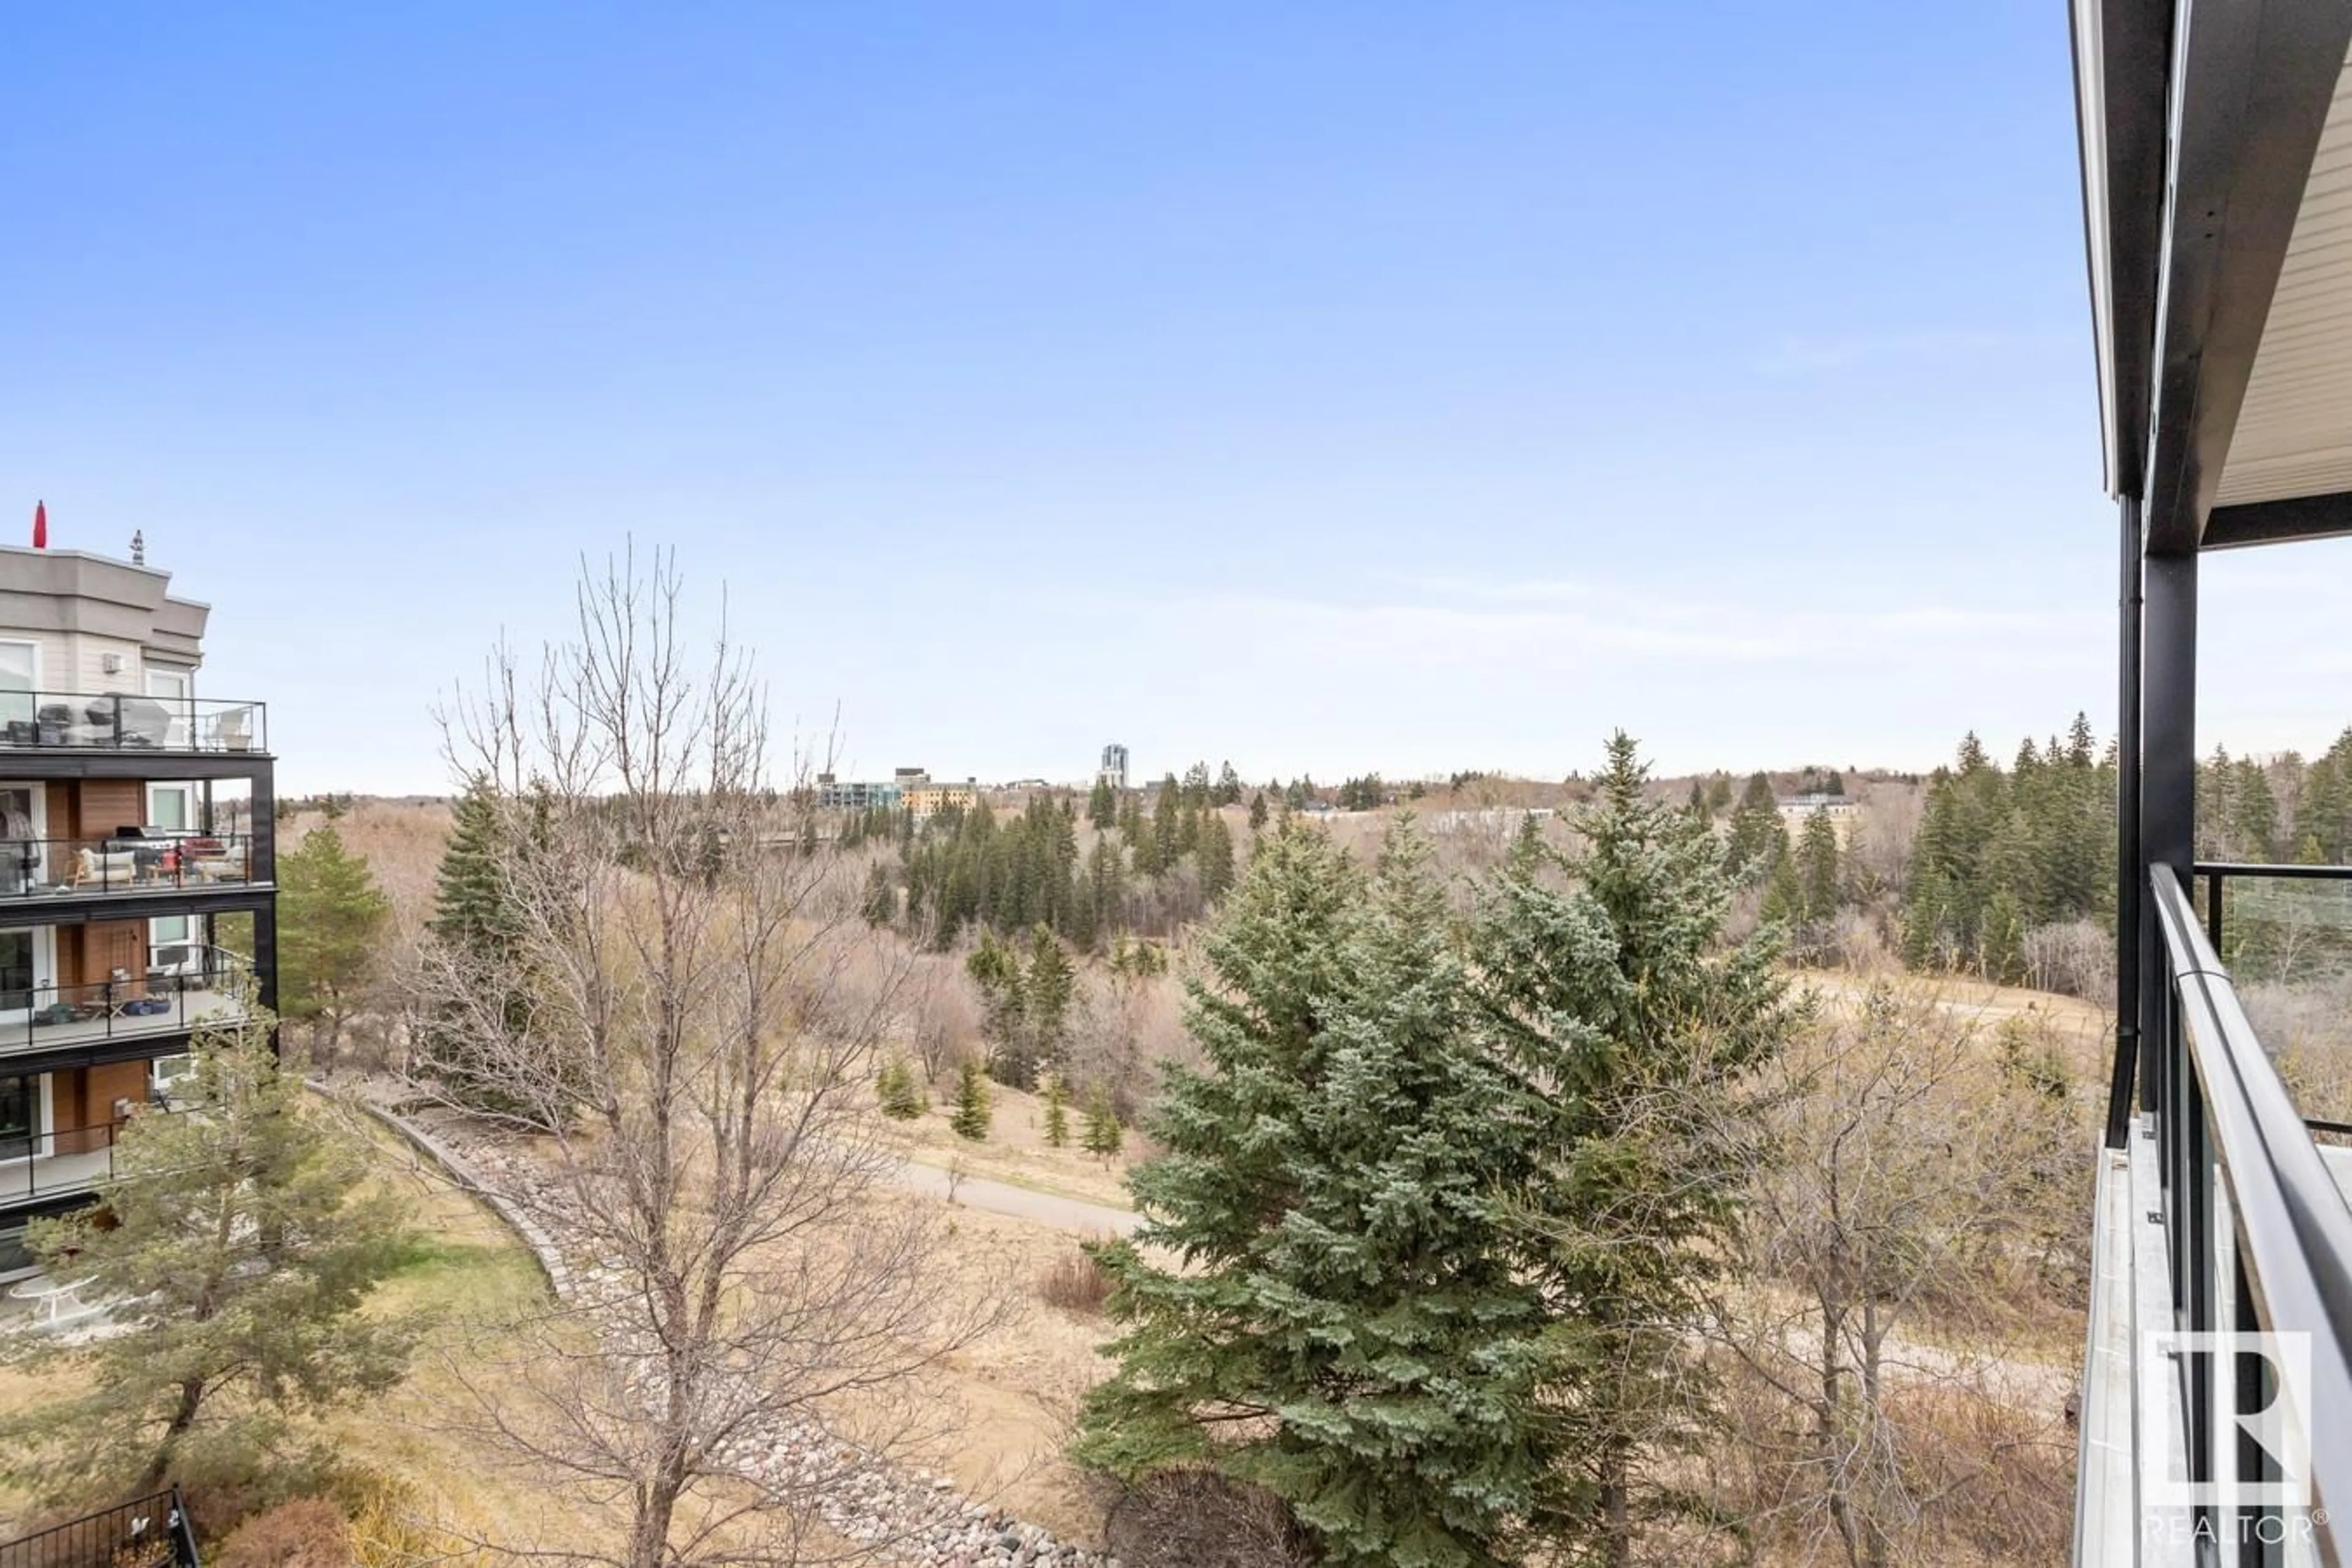 Forest view for #403 7839 96 ST NW, Edmonton Alberta T6C4R4